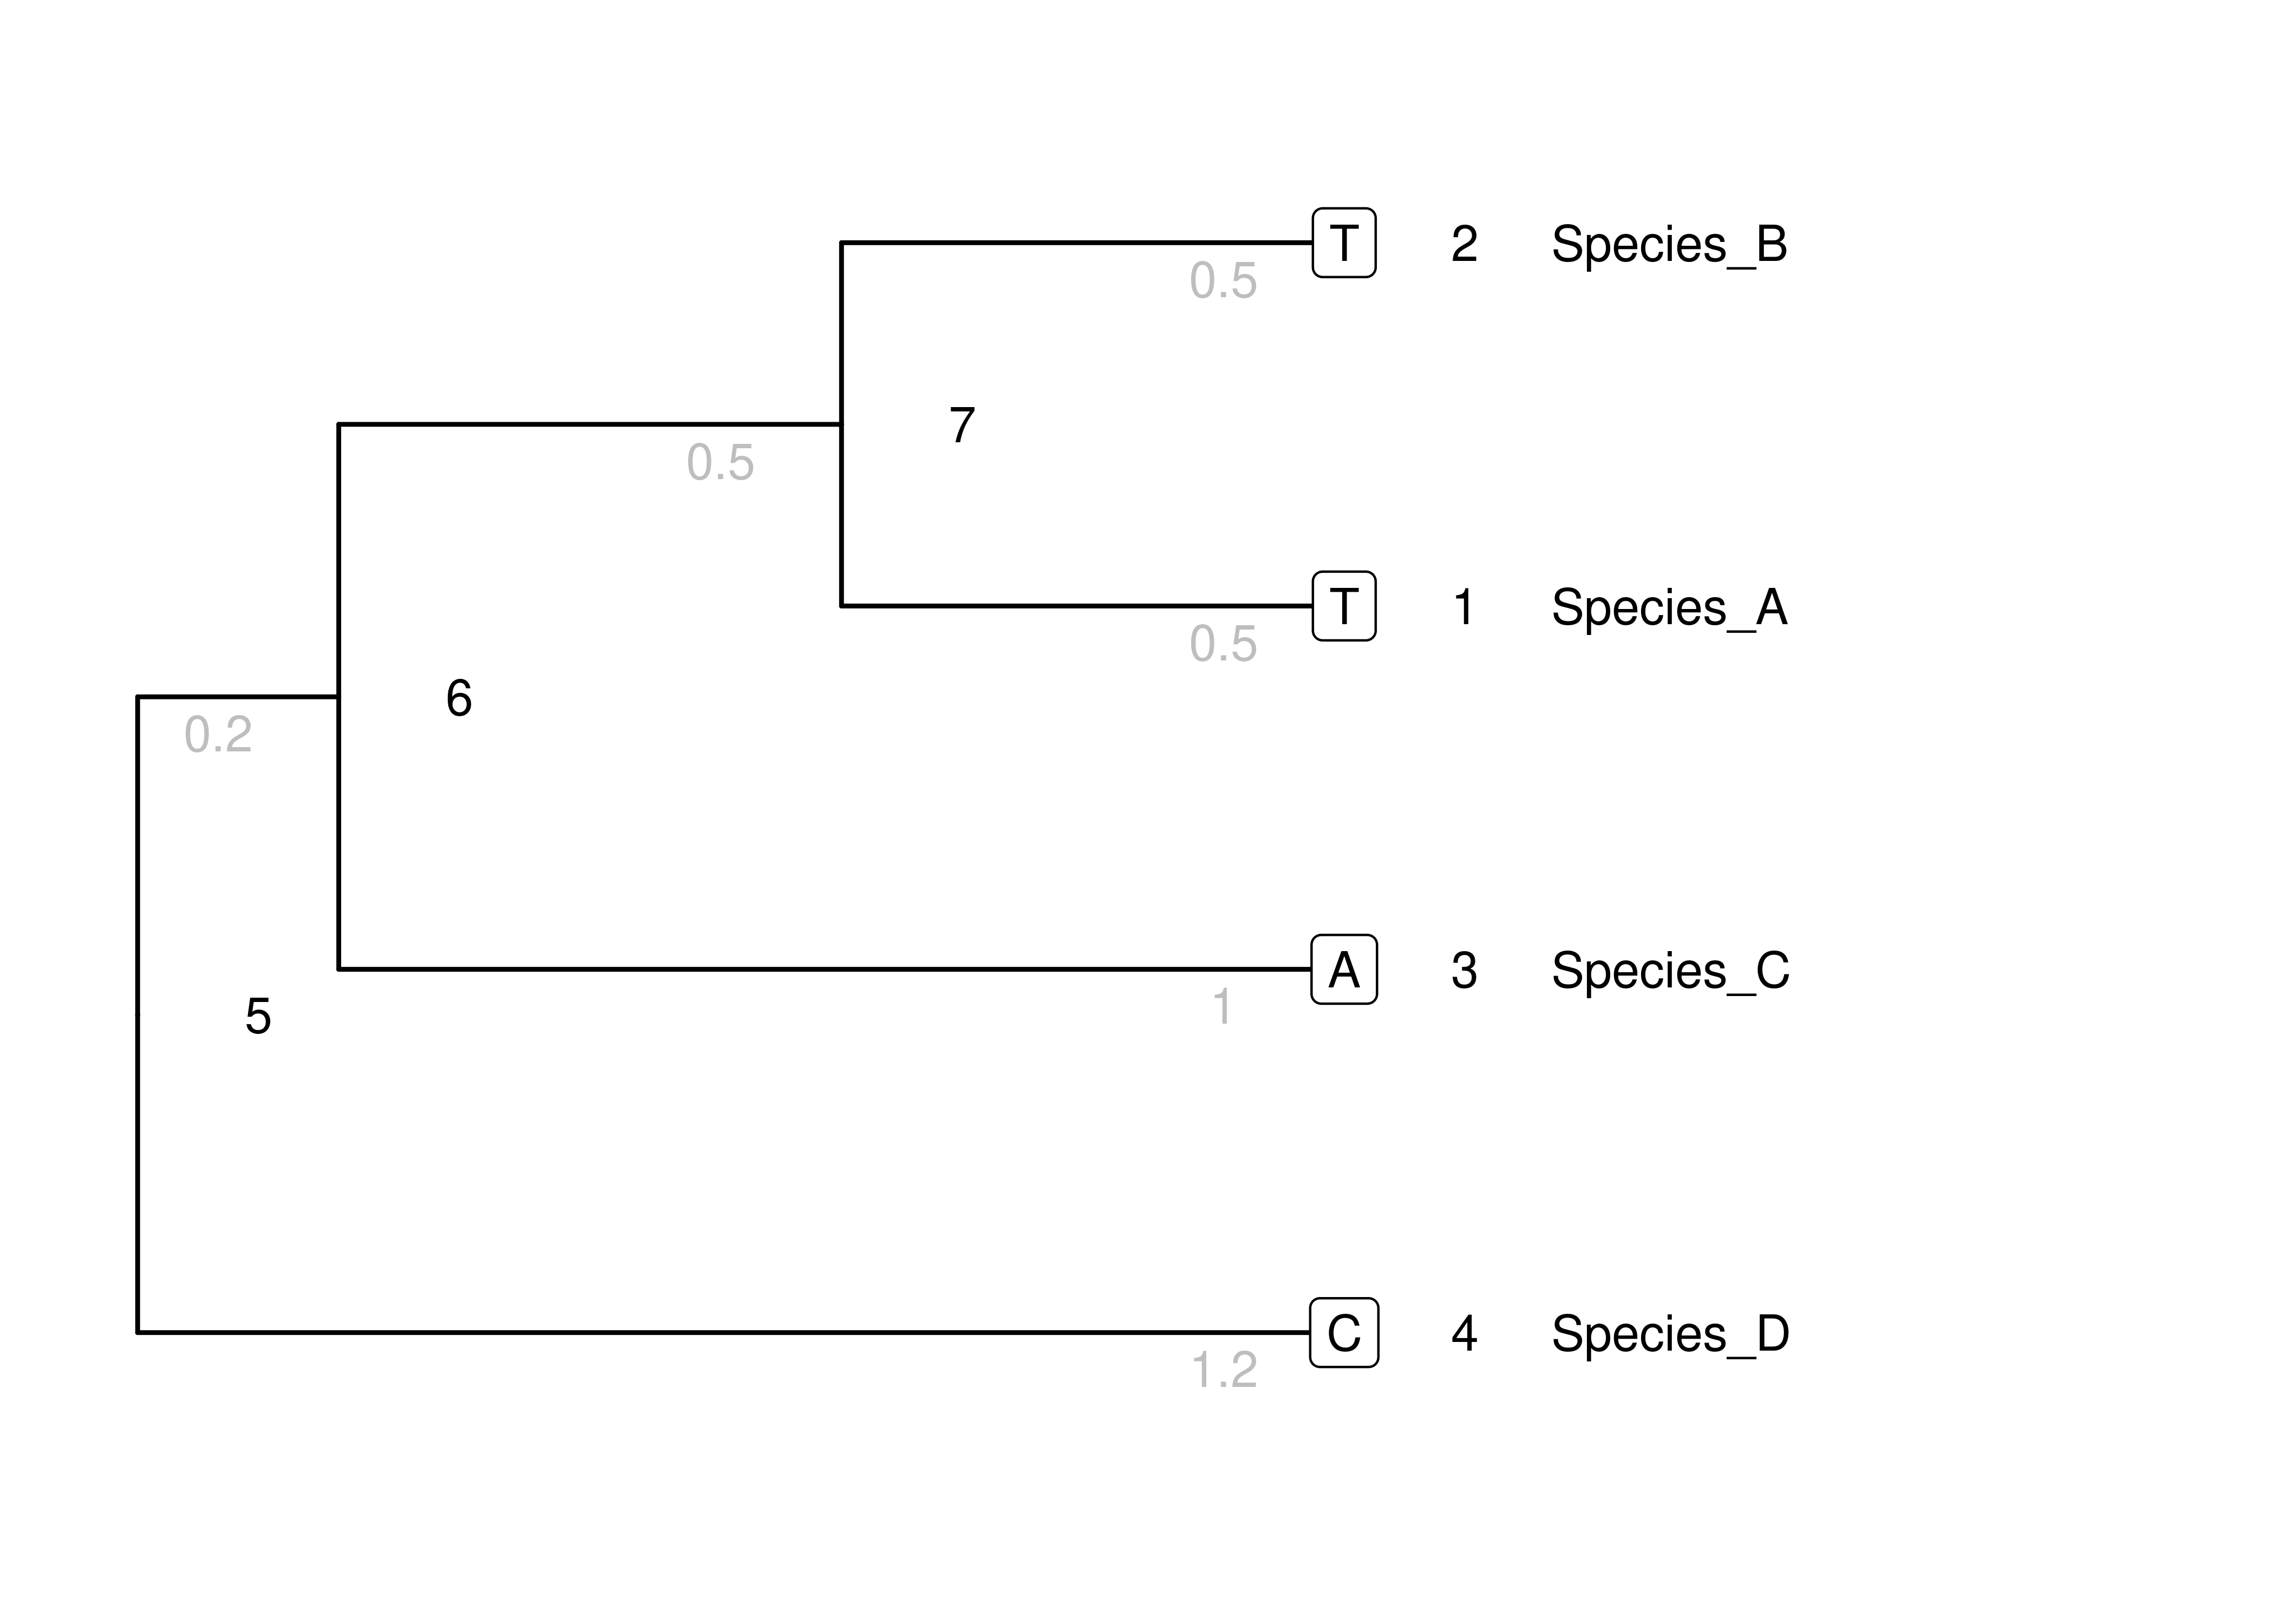 The toy phylogeny we will use to examine inference. Node numbers are in black. Branch lengths are gray numbers below branches. Tip node states are within boxes.